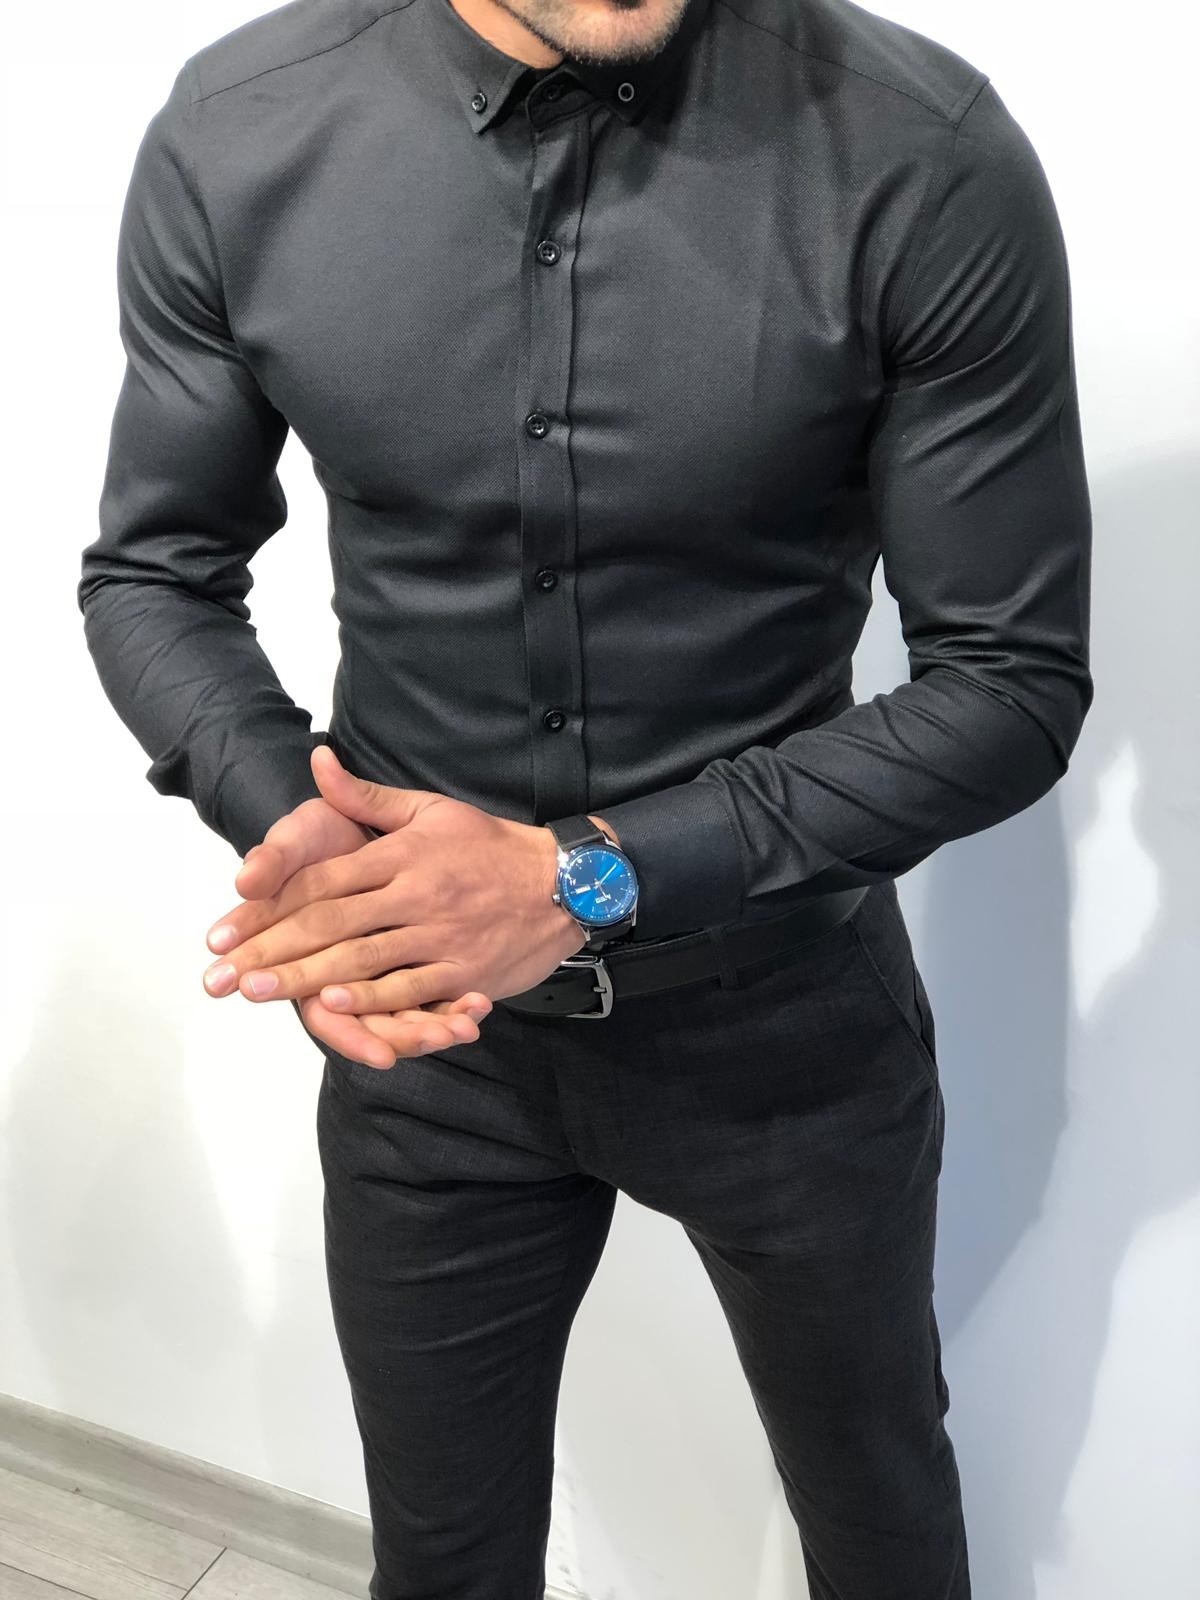 Buy Button Collar Dress Shirt Black by Gentwith.com with Free Shipping